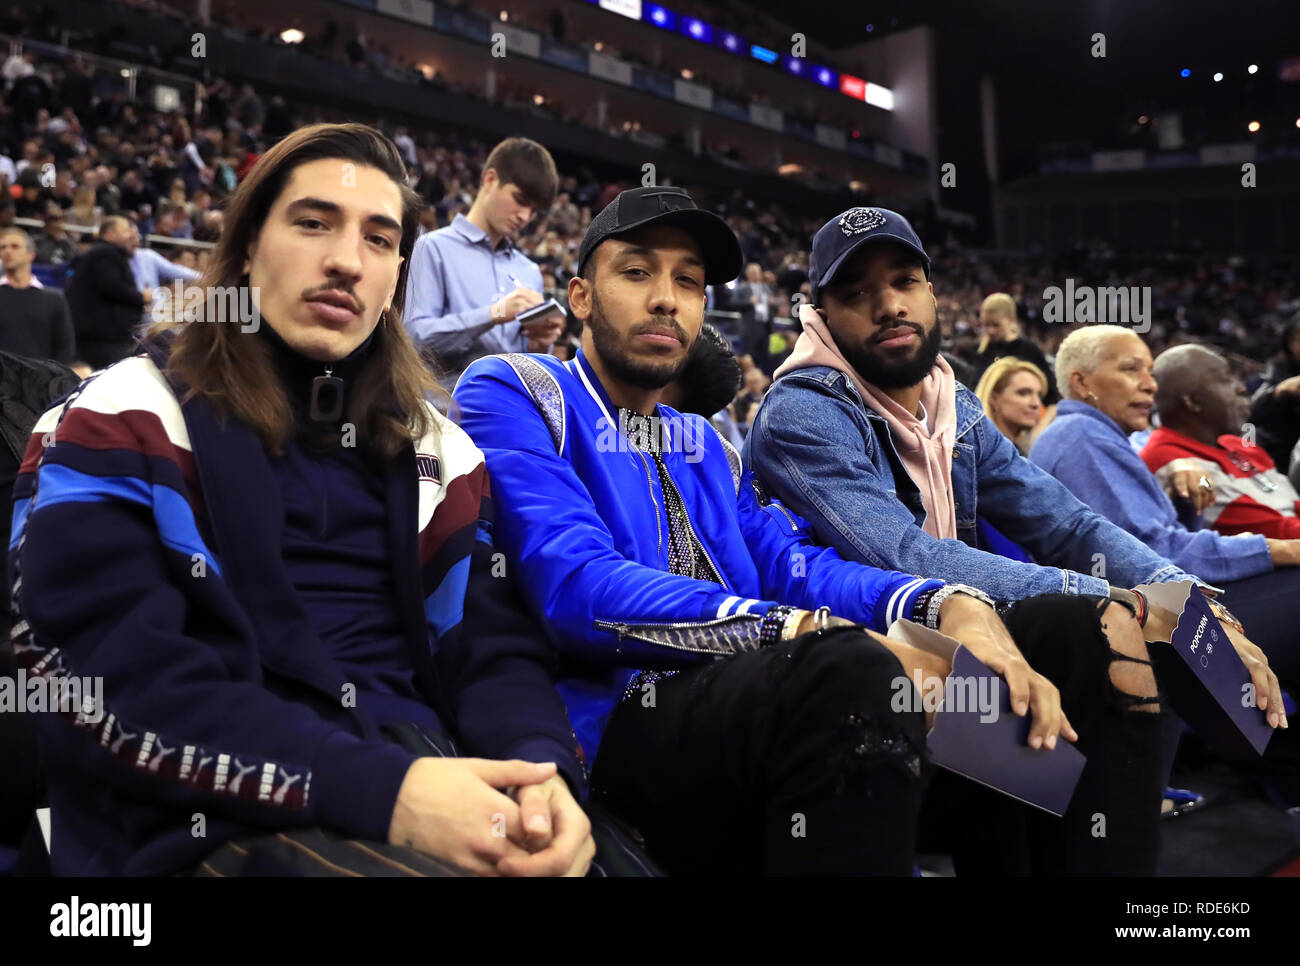 (From left to right) Hector Bellerin, Pierre-Emerick Aubameyang and Alexandre Lacazette in the crowd during the NBA London Game 2019 at the O2 Arena, London. Stock Photo